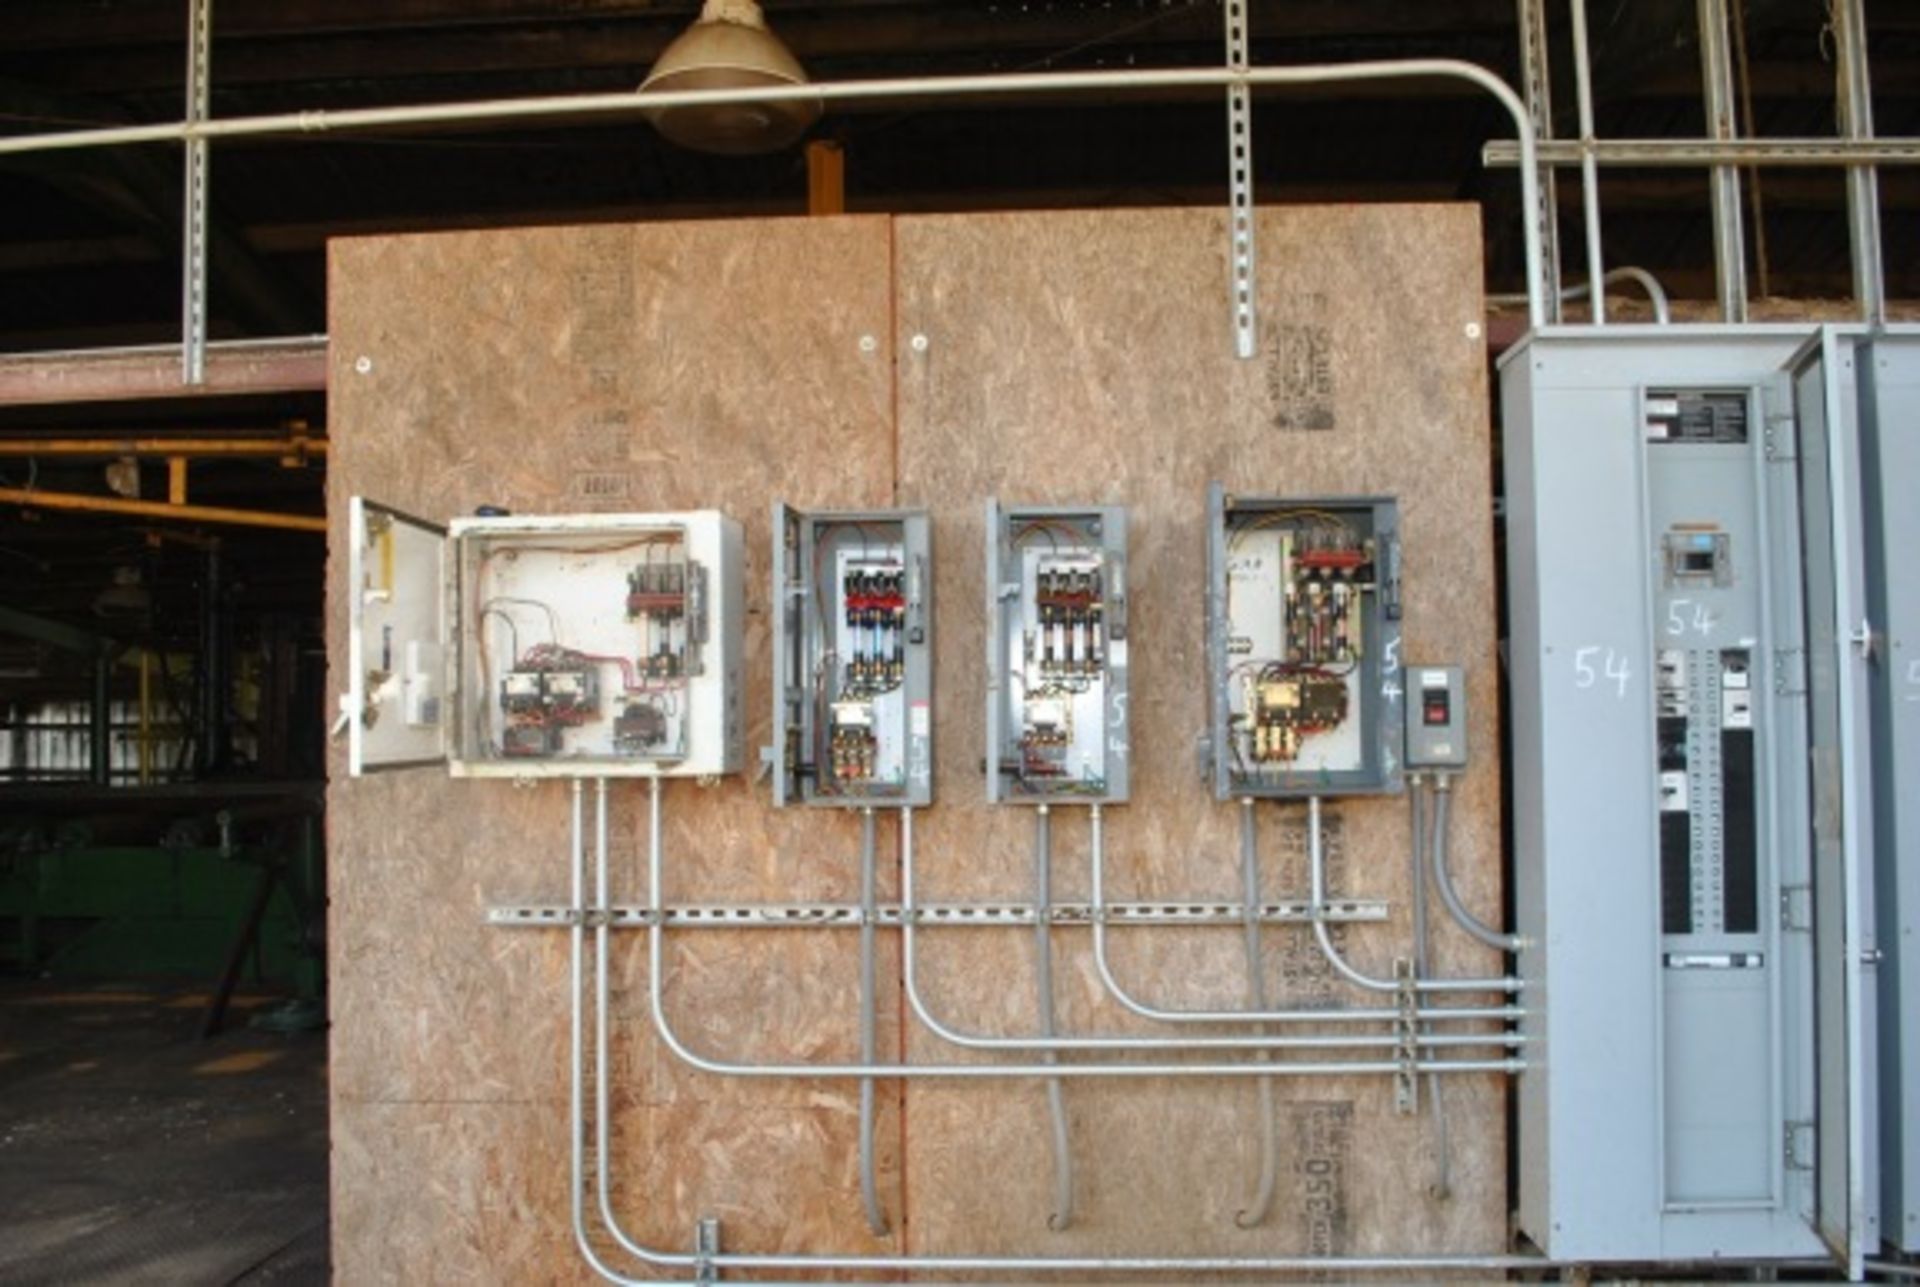 ELECTRICAL PANEL CONSISTING OF SIEMENS 200 AMP PANEL BOARD; W/(2) SIZE 1 REVERSIBLE STARTERS; W/ - Image 2 of 3